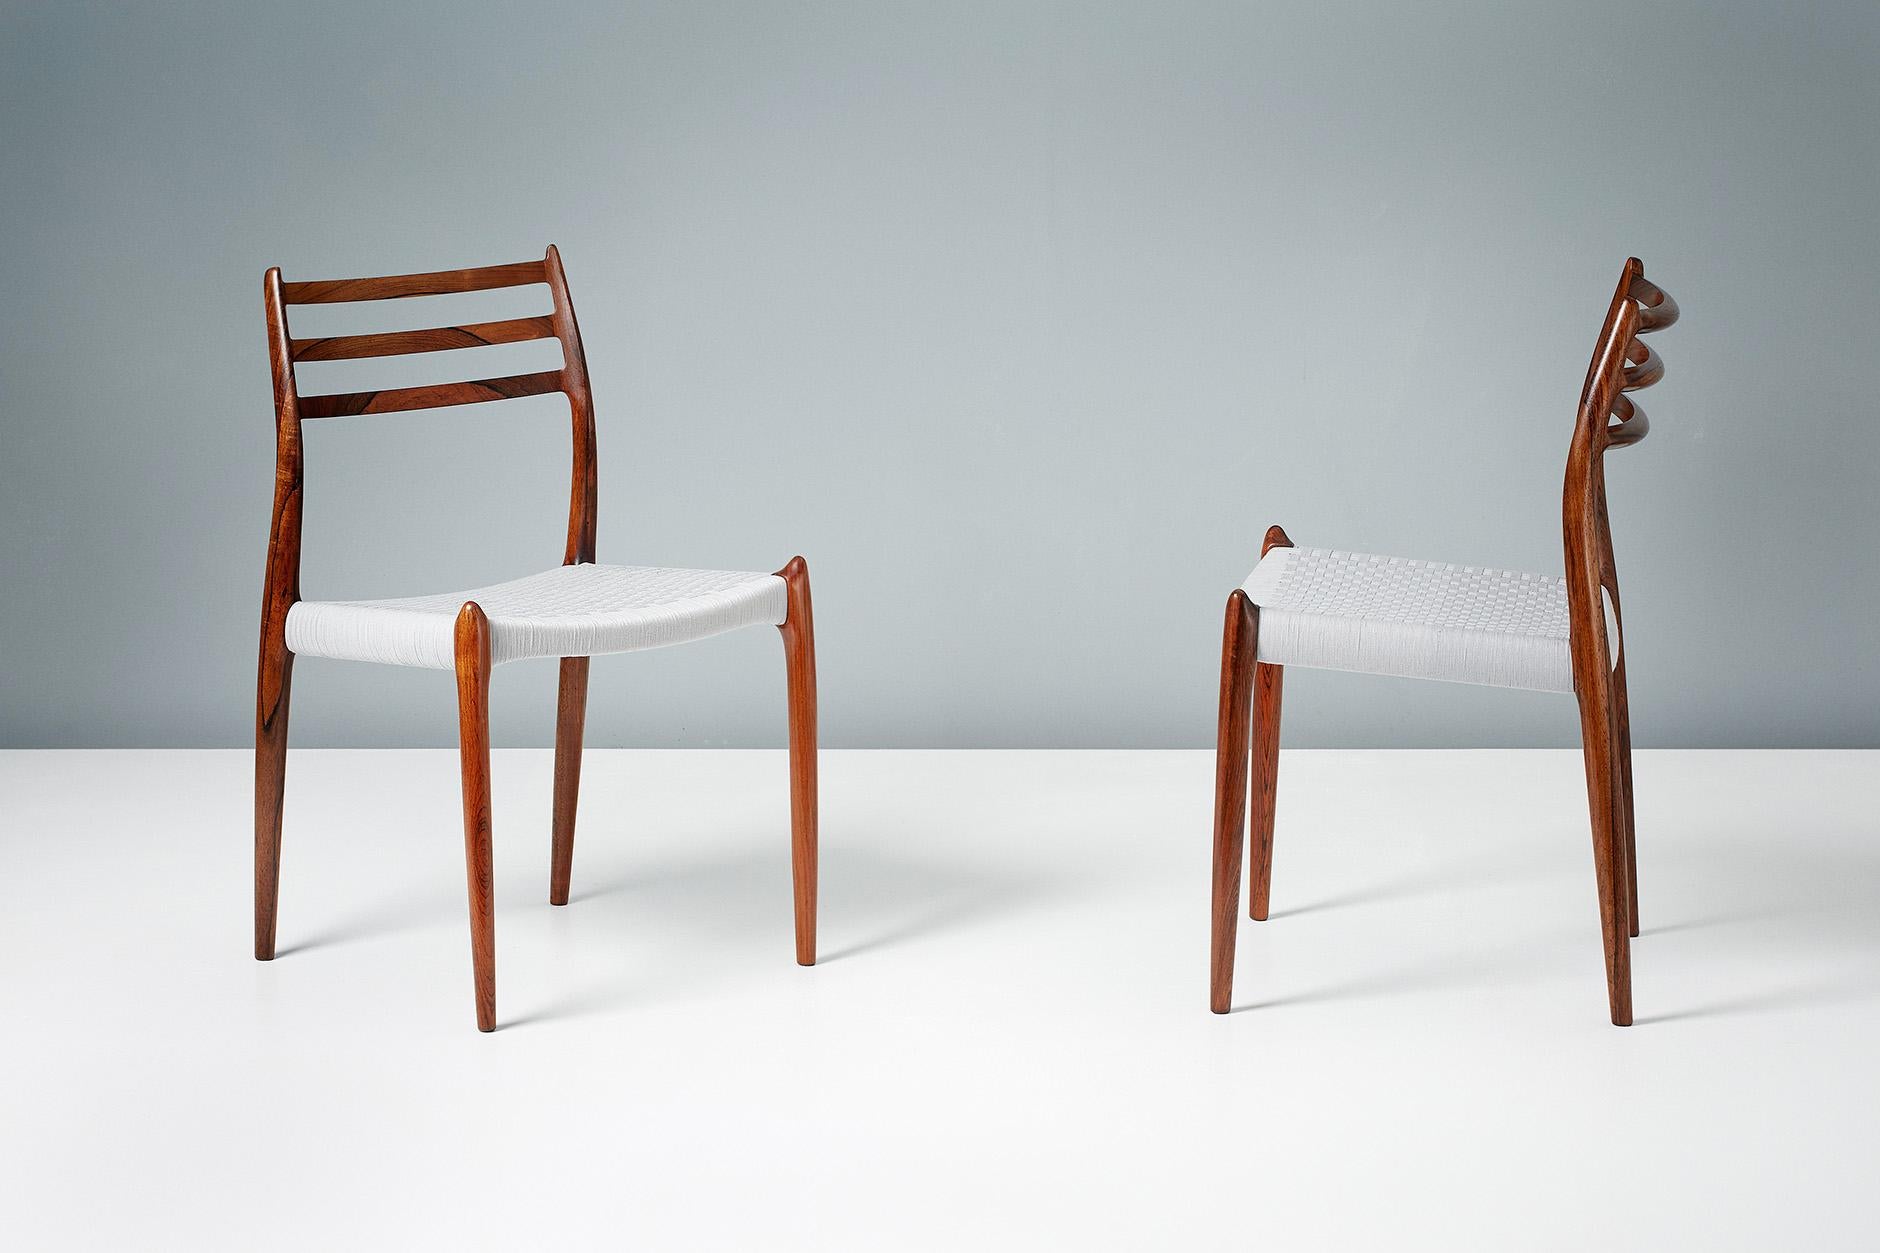 Niels O. Møller

Model 78 Dining Chairs, 1962

Set of 8 iconic model 78 dining chairs designed by Niels O. Møller for J.L. Moller Mobelfabrik, Denmark in 1962. The frames are made from highly figured, exquisite Brazilian rosewood, the finest of all